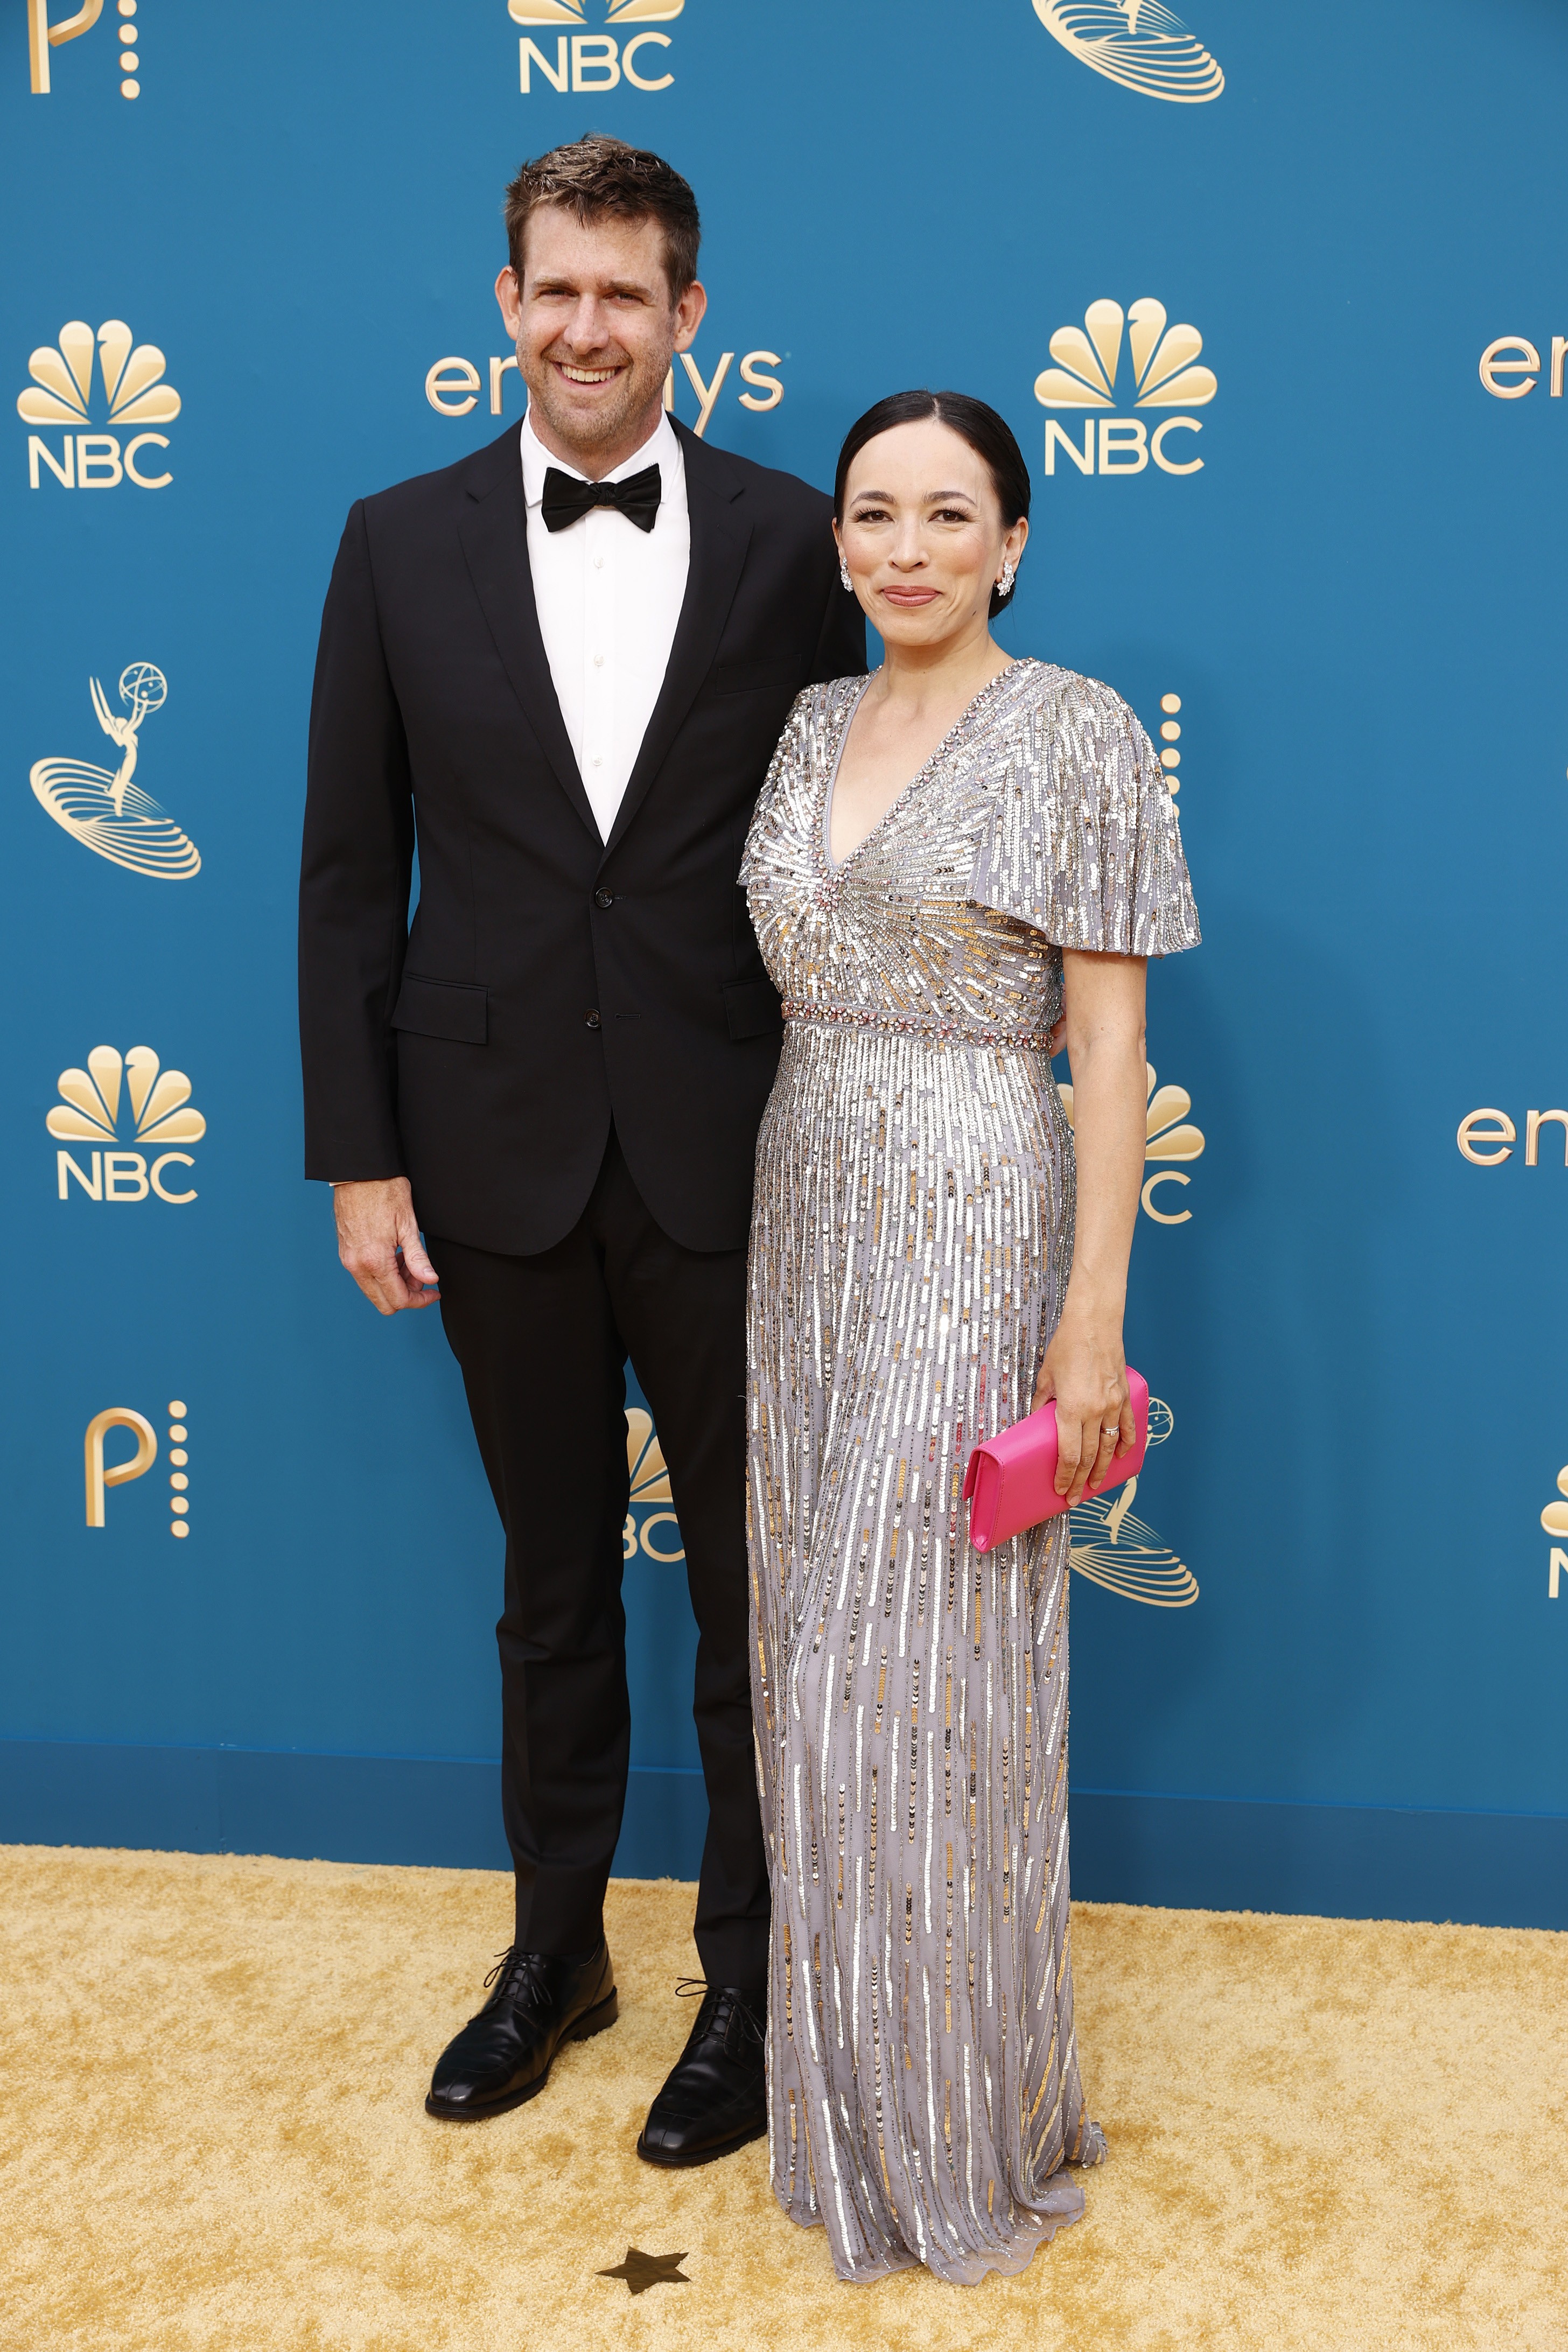 LOS ANGELES, CALIFORNIA - SEPTEMBER 12: 74th ANNUAL PRIMETIME EMMY AWARDS -- Pictured: (l-r) Jeff Waite and Liz Phang arrive to the 74th Annual Primetime Emmy Awards held at the Microsoft Theater on September 12, 2022. -- (Photo by Trae Patton/NBC via Get (Foto: NBC via Getty Images)